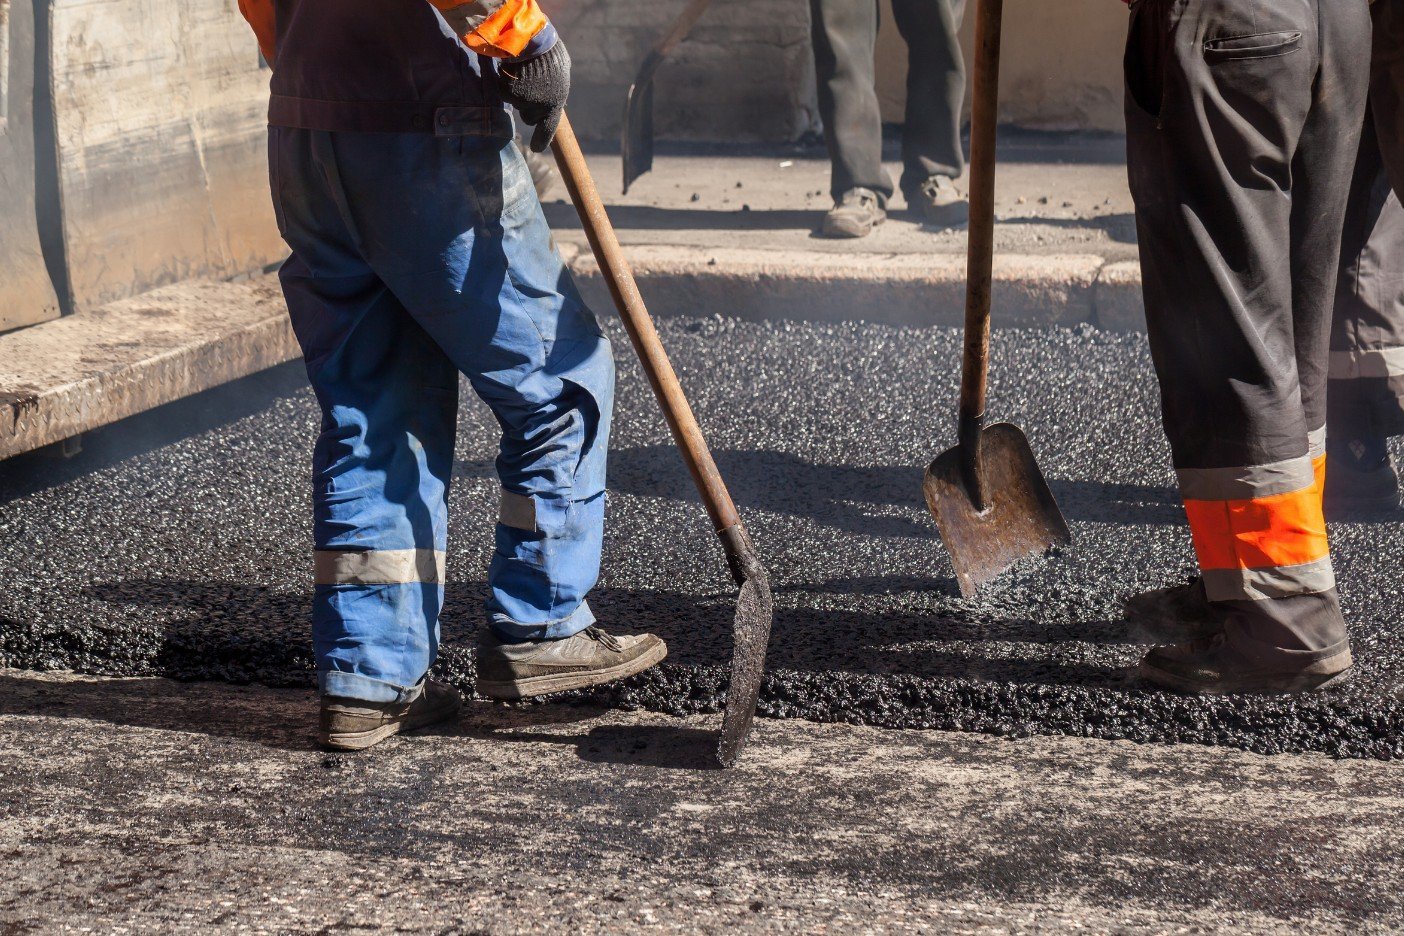 Three road workers from Palm Beach Asphalt are engaged in asphalt paving. They wear safety gear including heavy boots and gloves. Two hold shovels, while the third uses a rake to spread the fresh black asphalt. They stand on top of the new layer being applied to the road surface by their contractor.